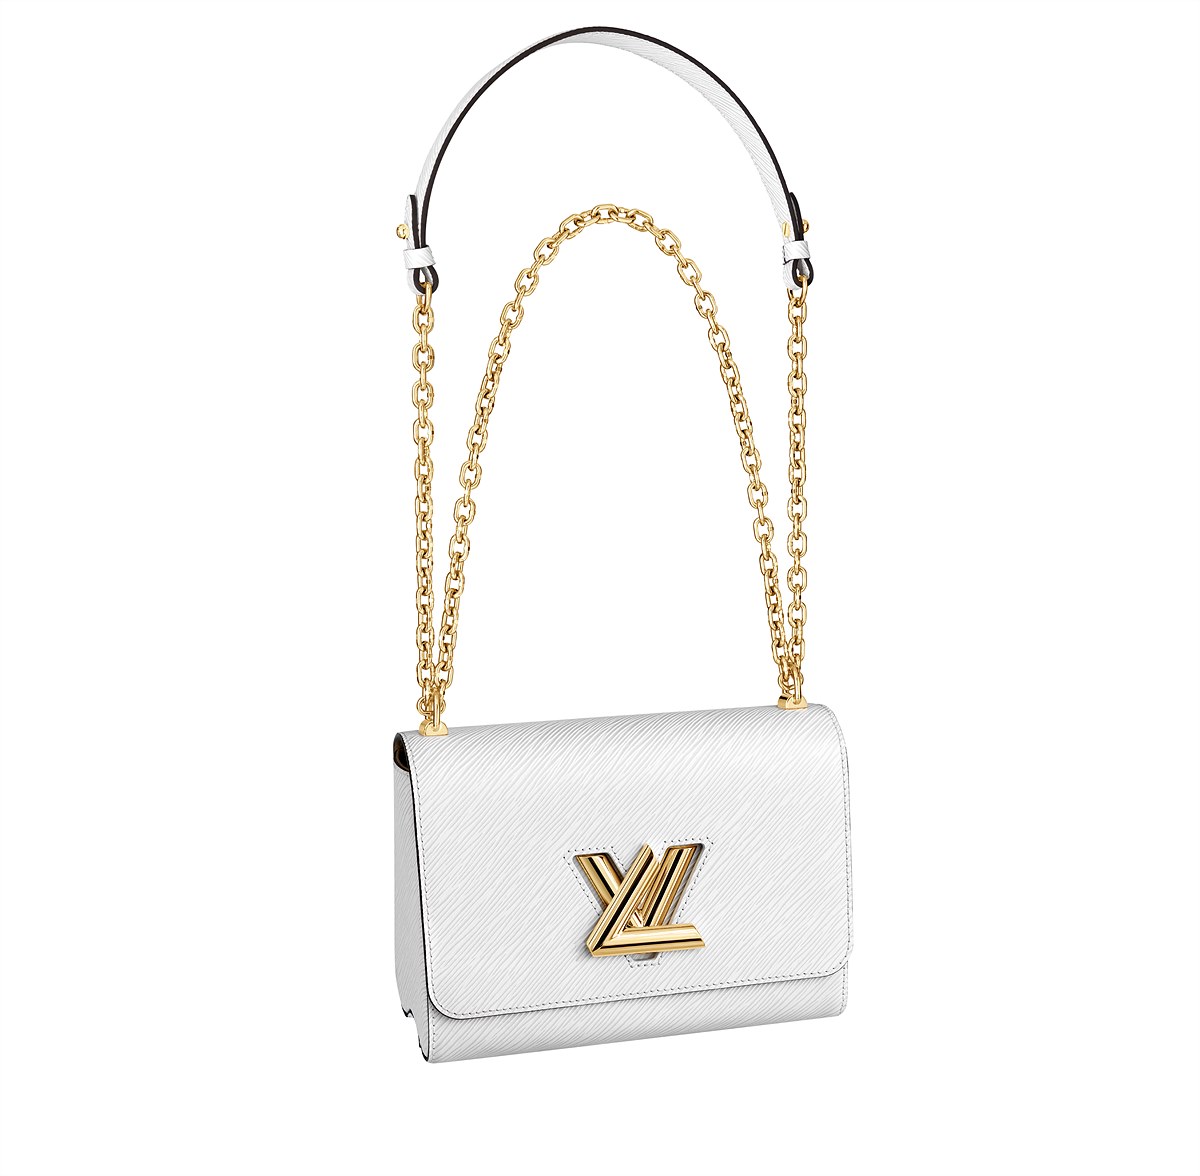 LV_Twist MM in white epi grained leather